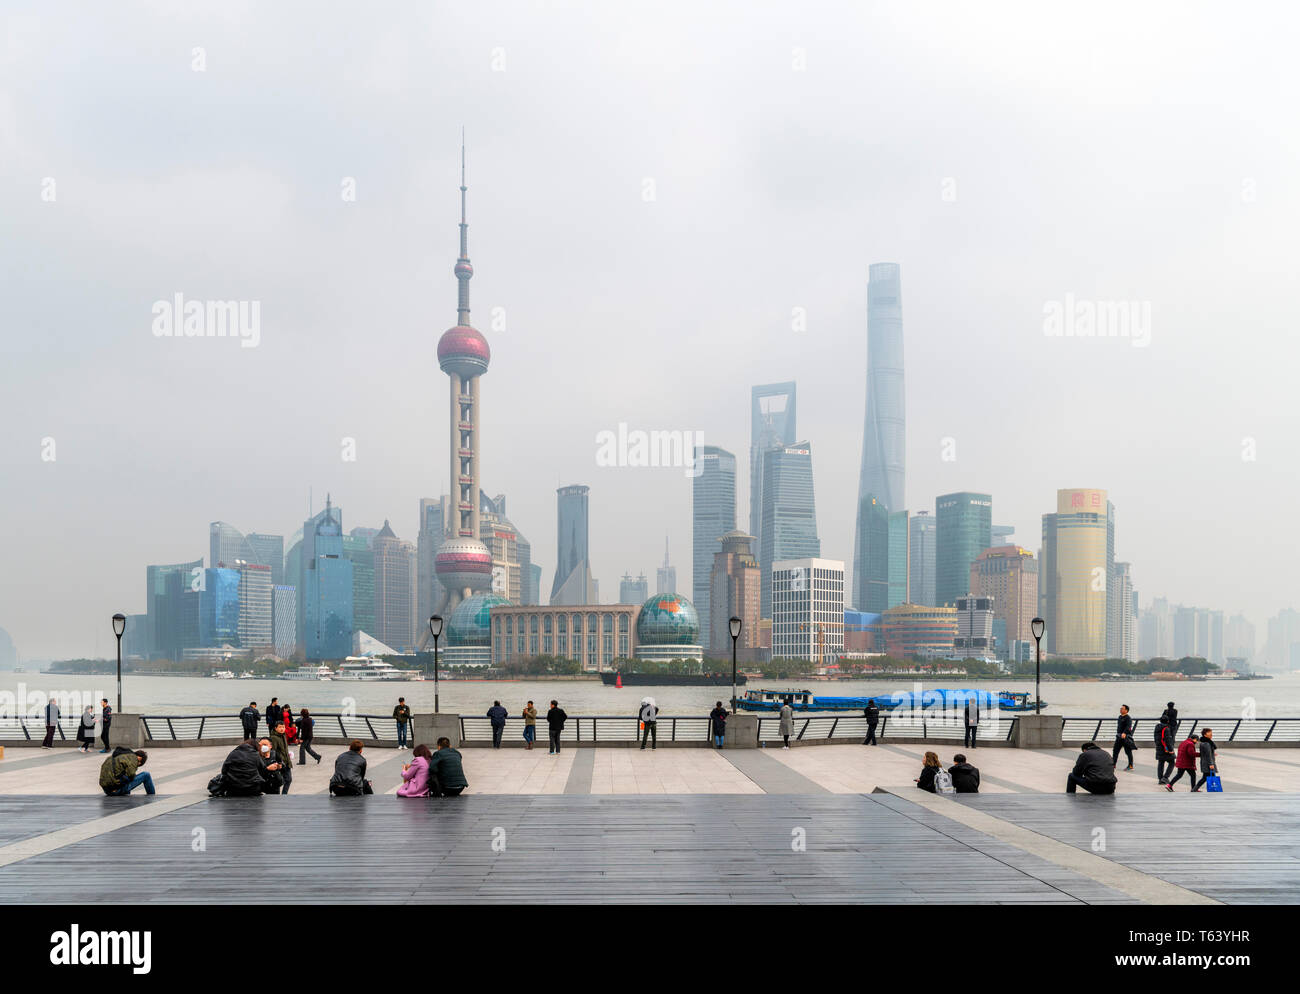 Shanghai skyline. The Pudong district and the Huangpu River viewed from The Bund (Waitan) on a day of high air pollution, Shanghai, China Stock Photo